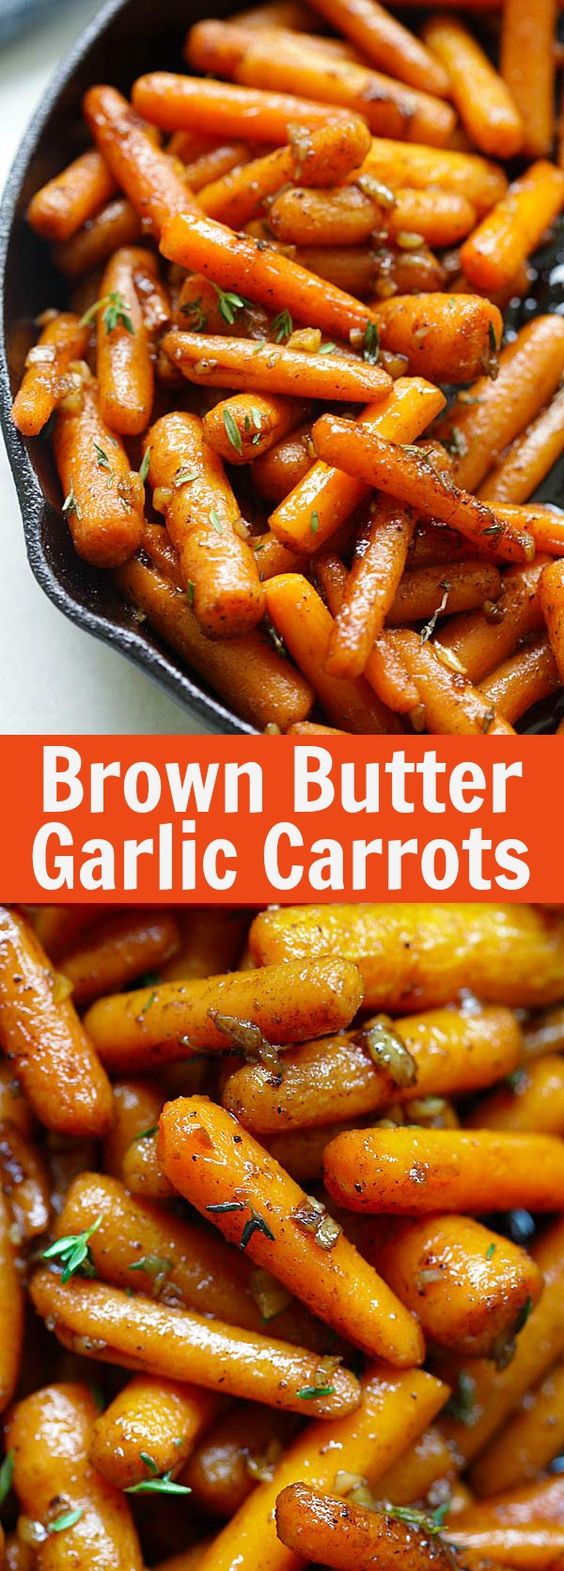 Brown Butter Garlic Honey Roasted Carrots – the best roasted carrots ever with lots of garlic, brown butter and honey. SO good